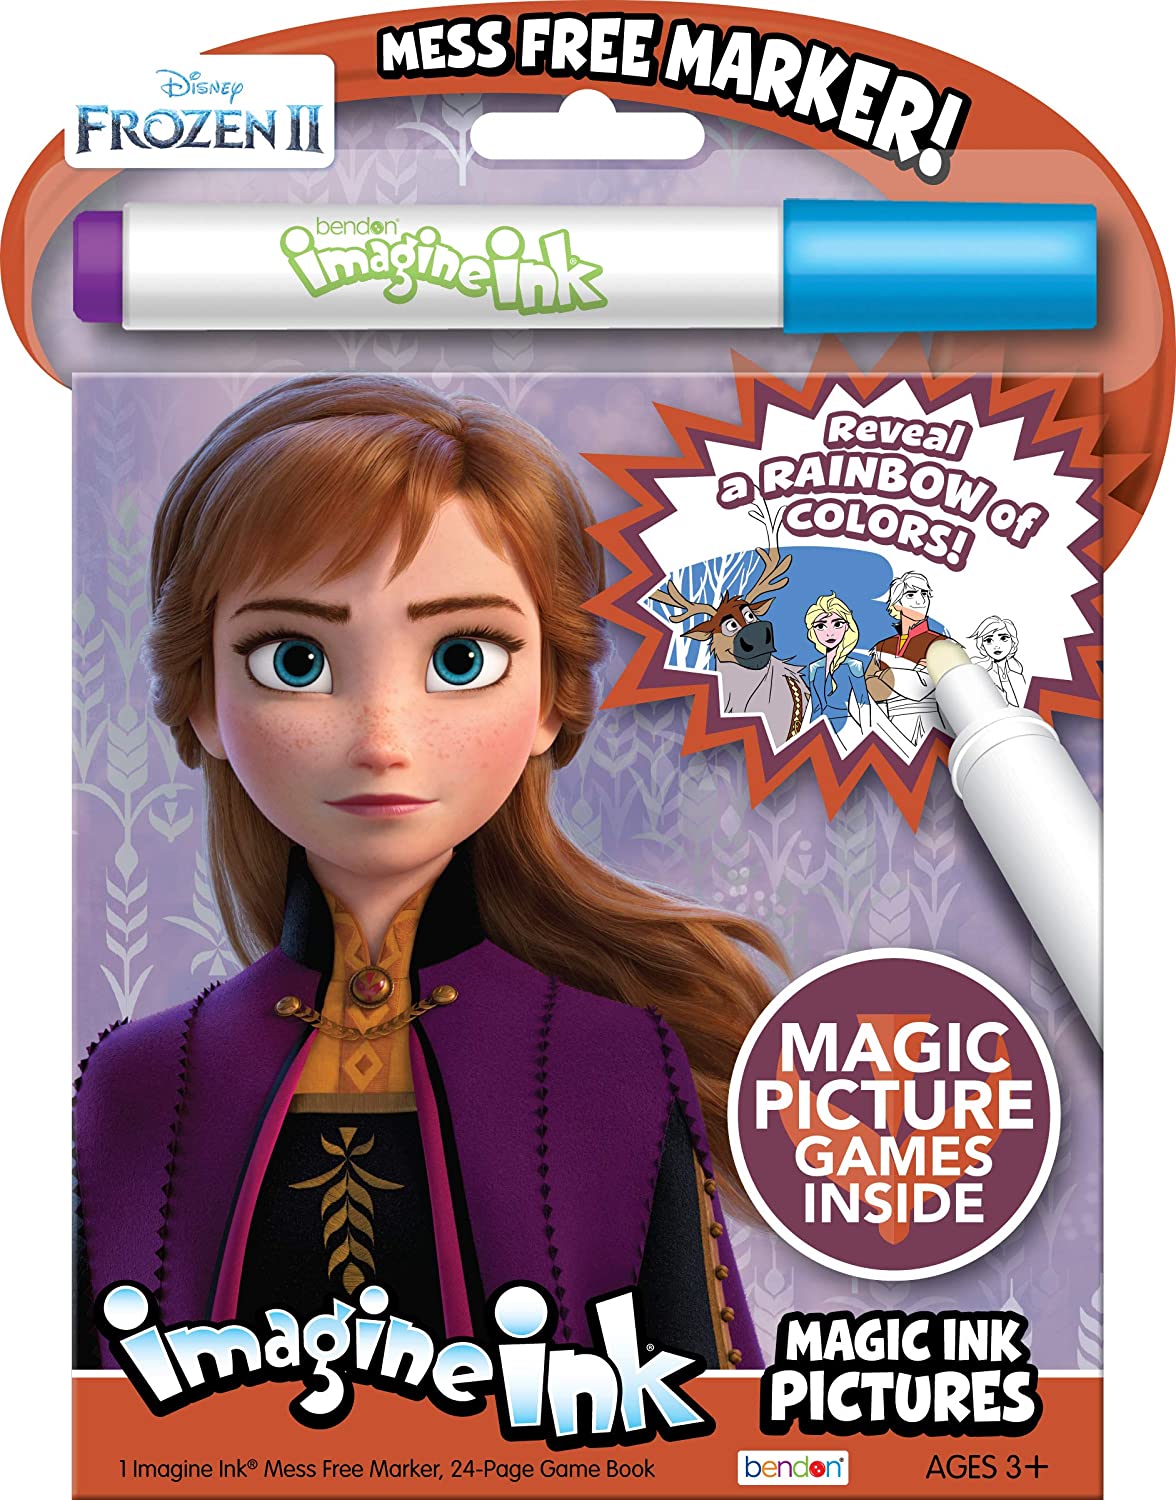  Bendon Frozen Coloring and Activity Book (Coloring